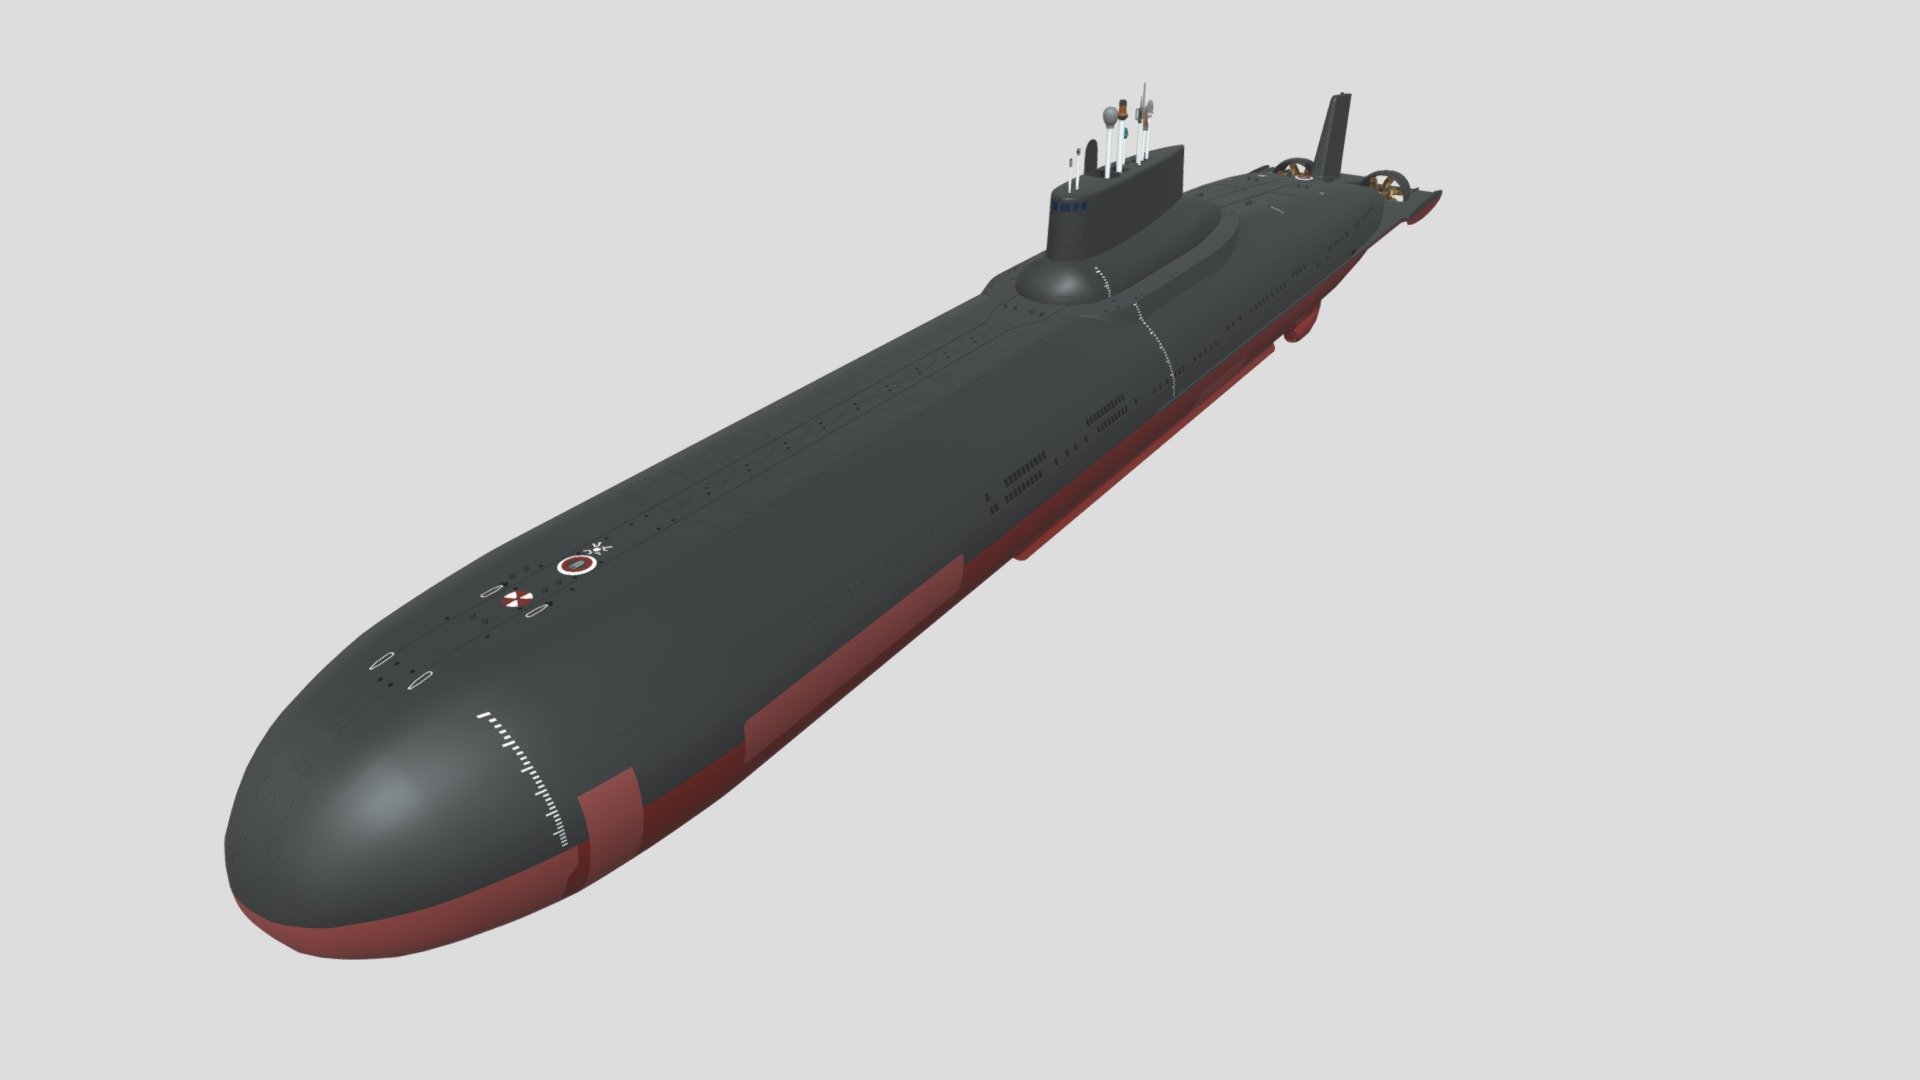 The Typhoon class, Soviet designation Project 941 Akula, is a class of nuclear-powered ballistic missile submarines designed and built by the Soviet Union

Blender 3.1

Cycles - Typhoon-Class Submarine - 3D model by DFL81 3d model